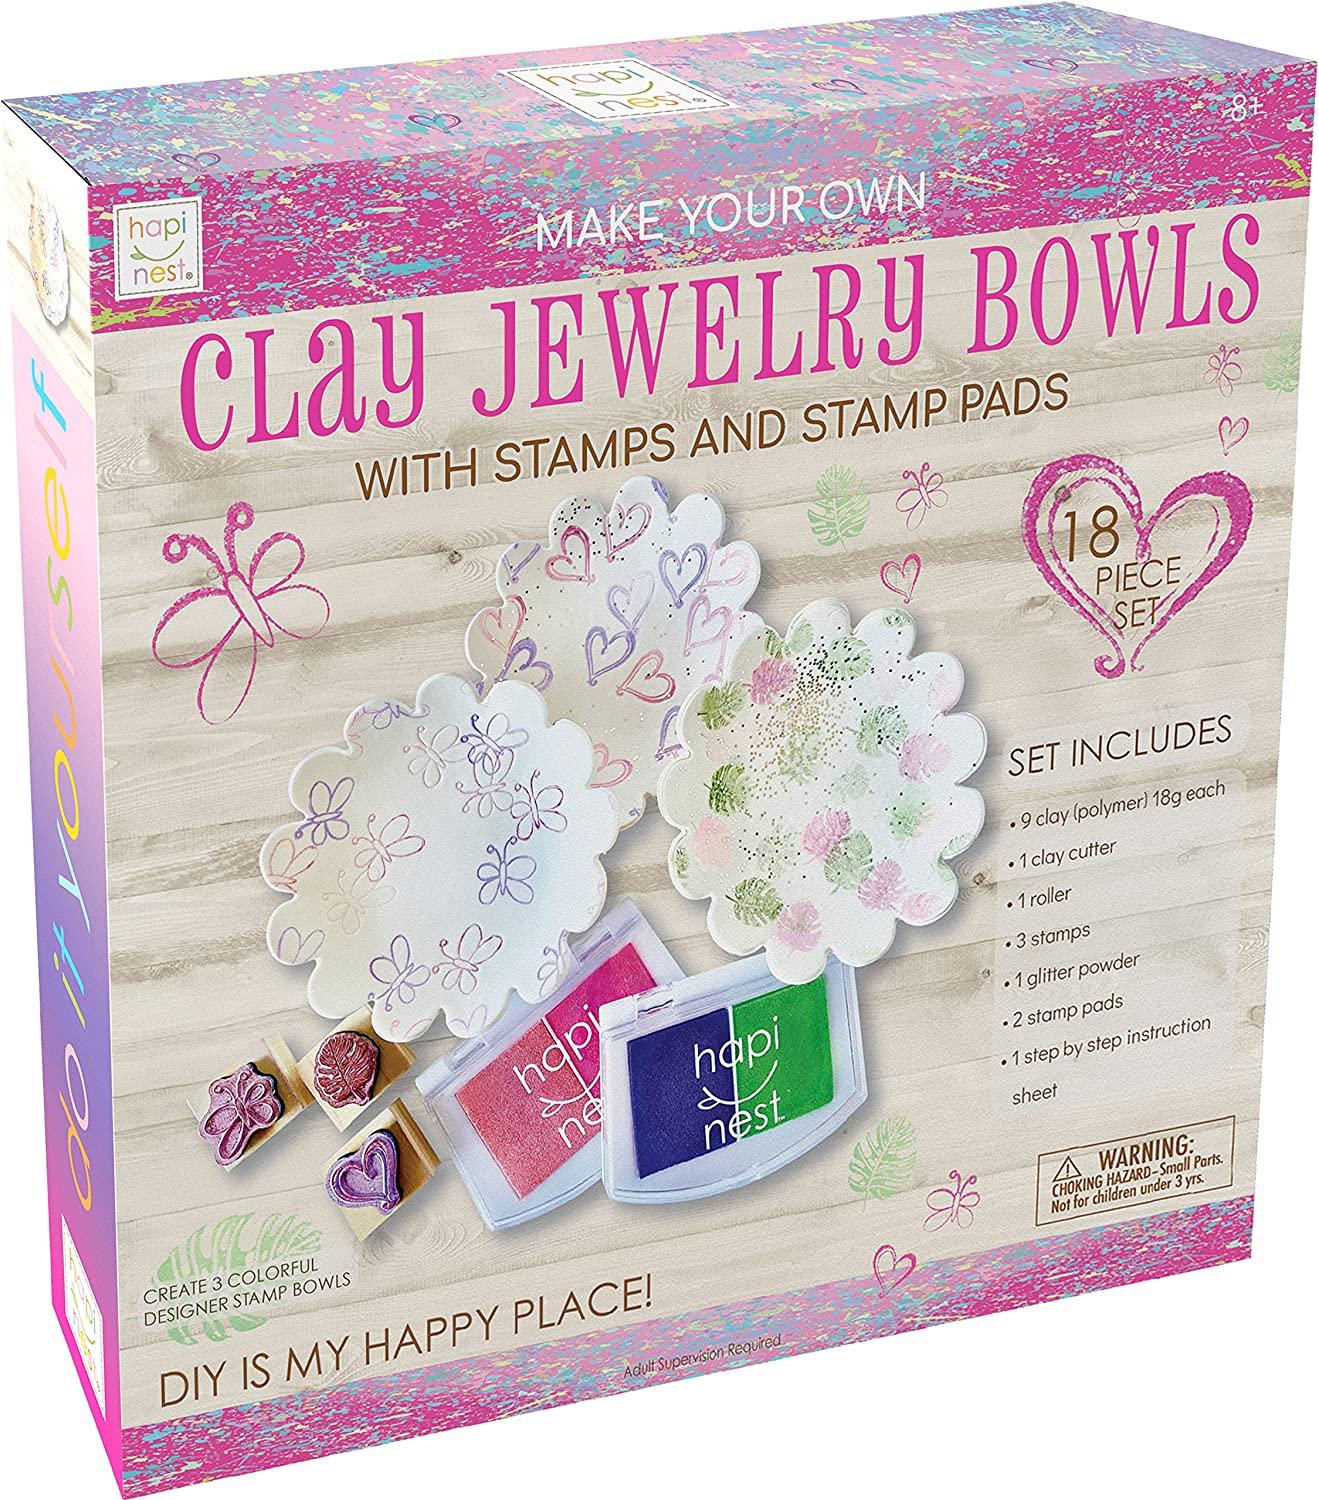 https://www.dontwasteyourmoney.com/wp-content/uploads/2023/01/hapinest-non-toxic-polymer-clay-art-kit-for-9-12-year-olds-28-piece.jpg